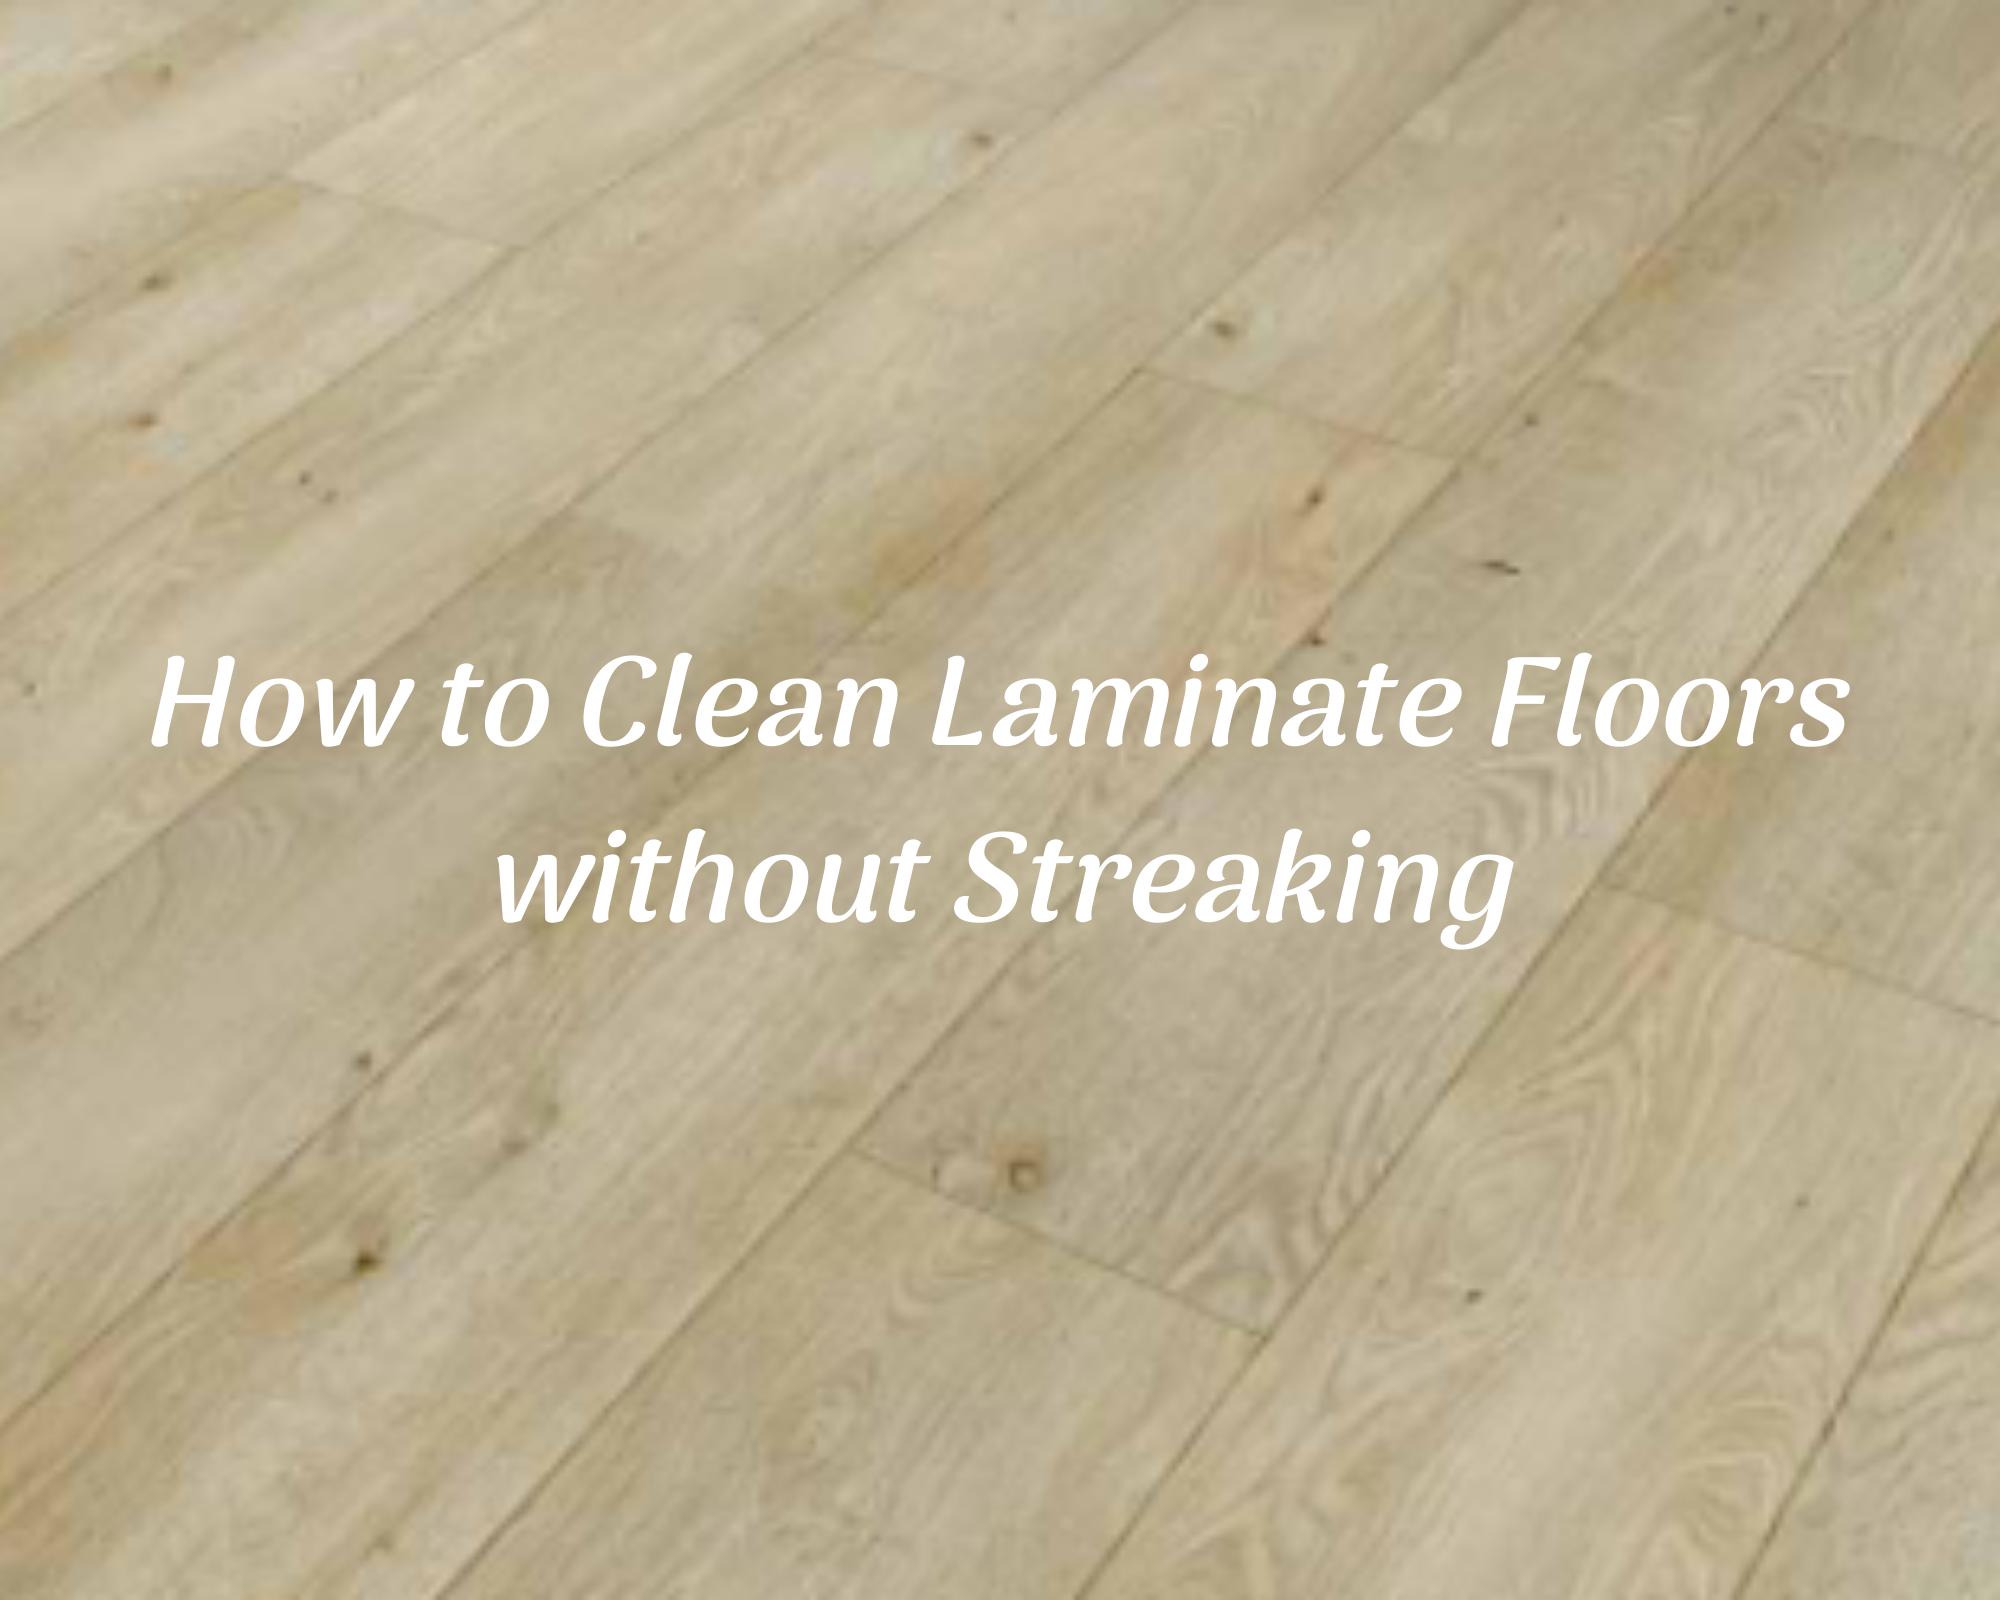 How To Clean Laminate Floors Without Streaking